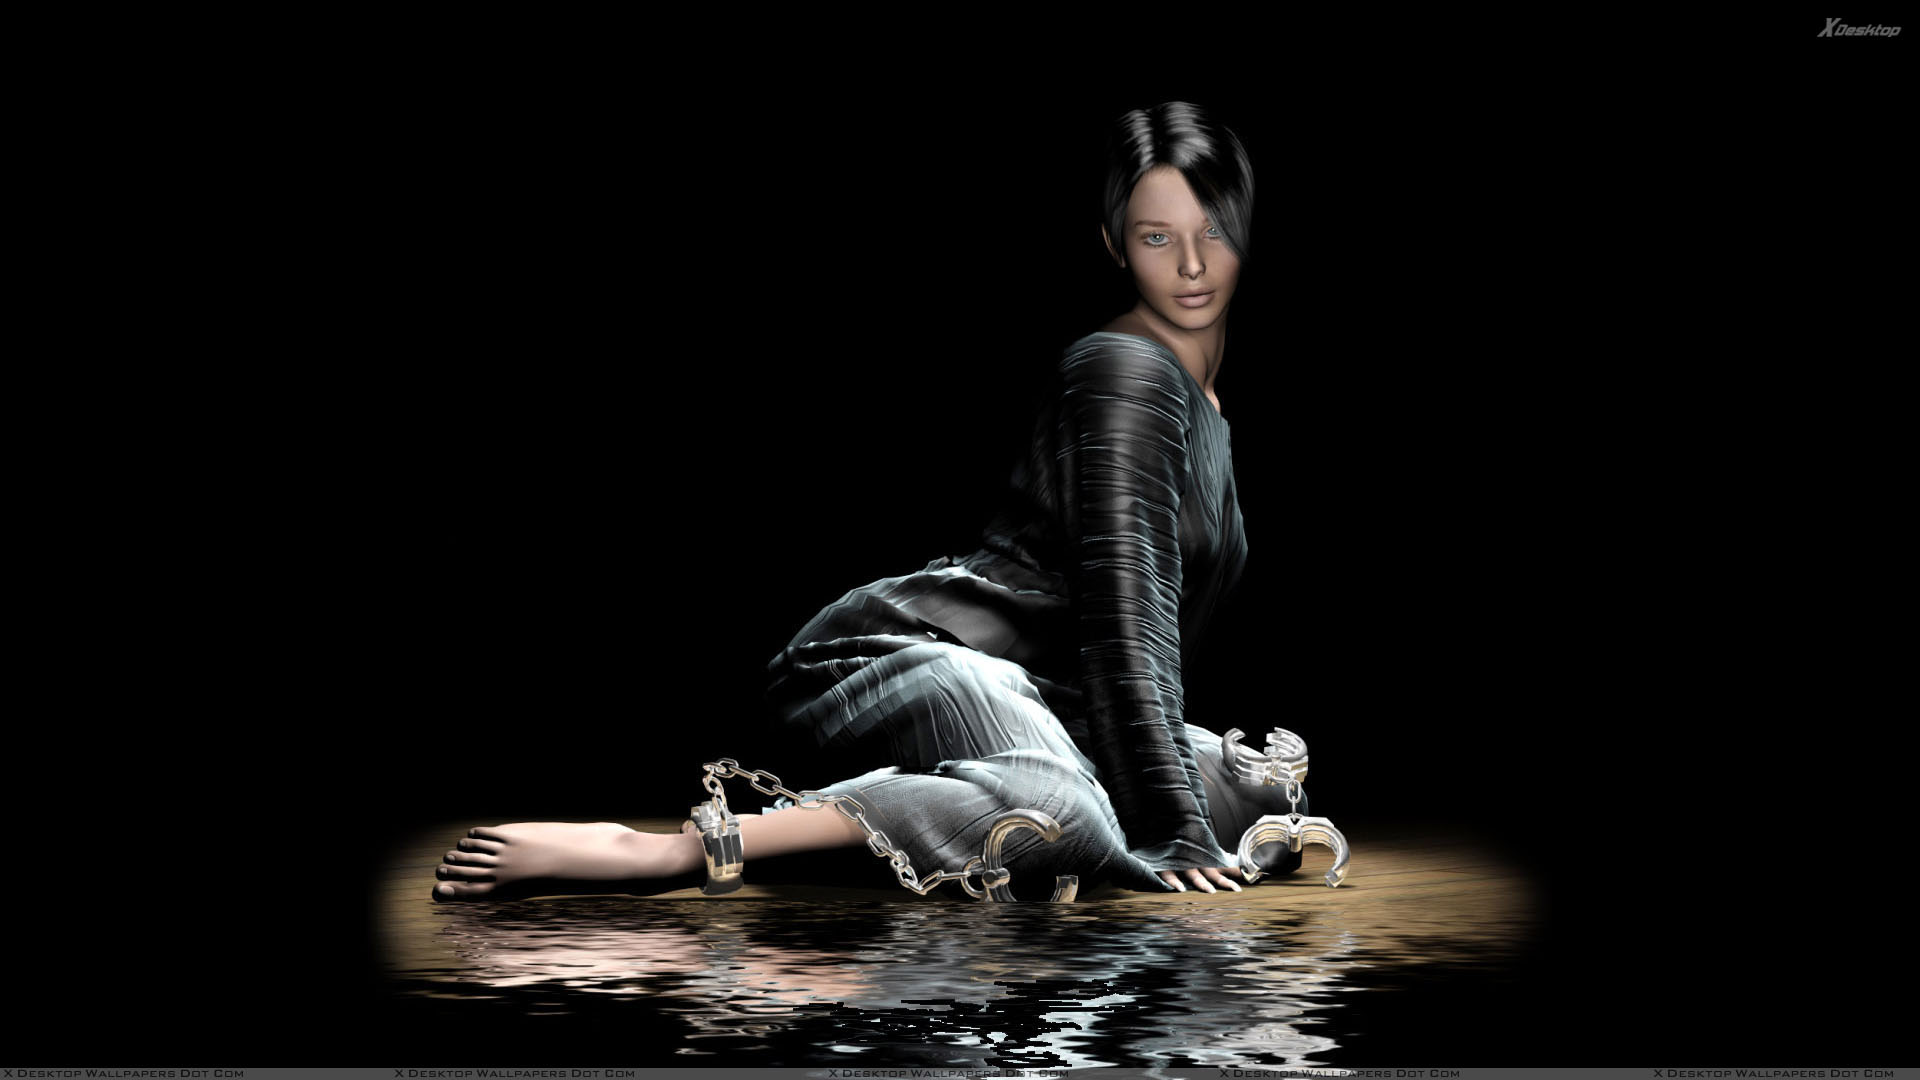 3d Girl Sitting In Water In Black Dress And Black Background Wallpaper 1920x1080